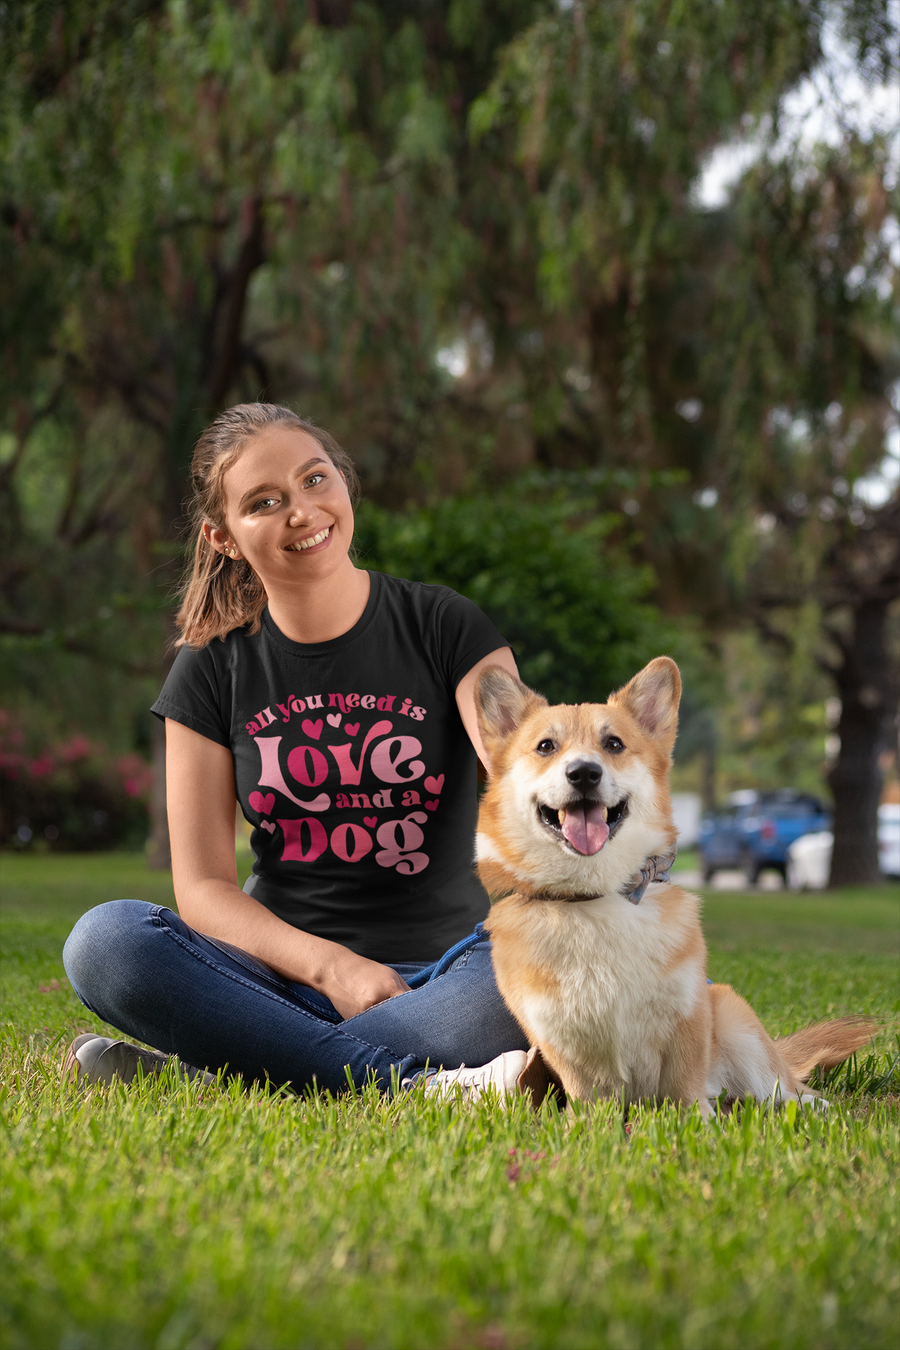 All You Need is Love and a Dog Tee